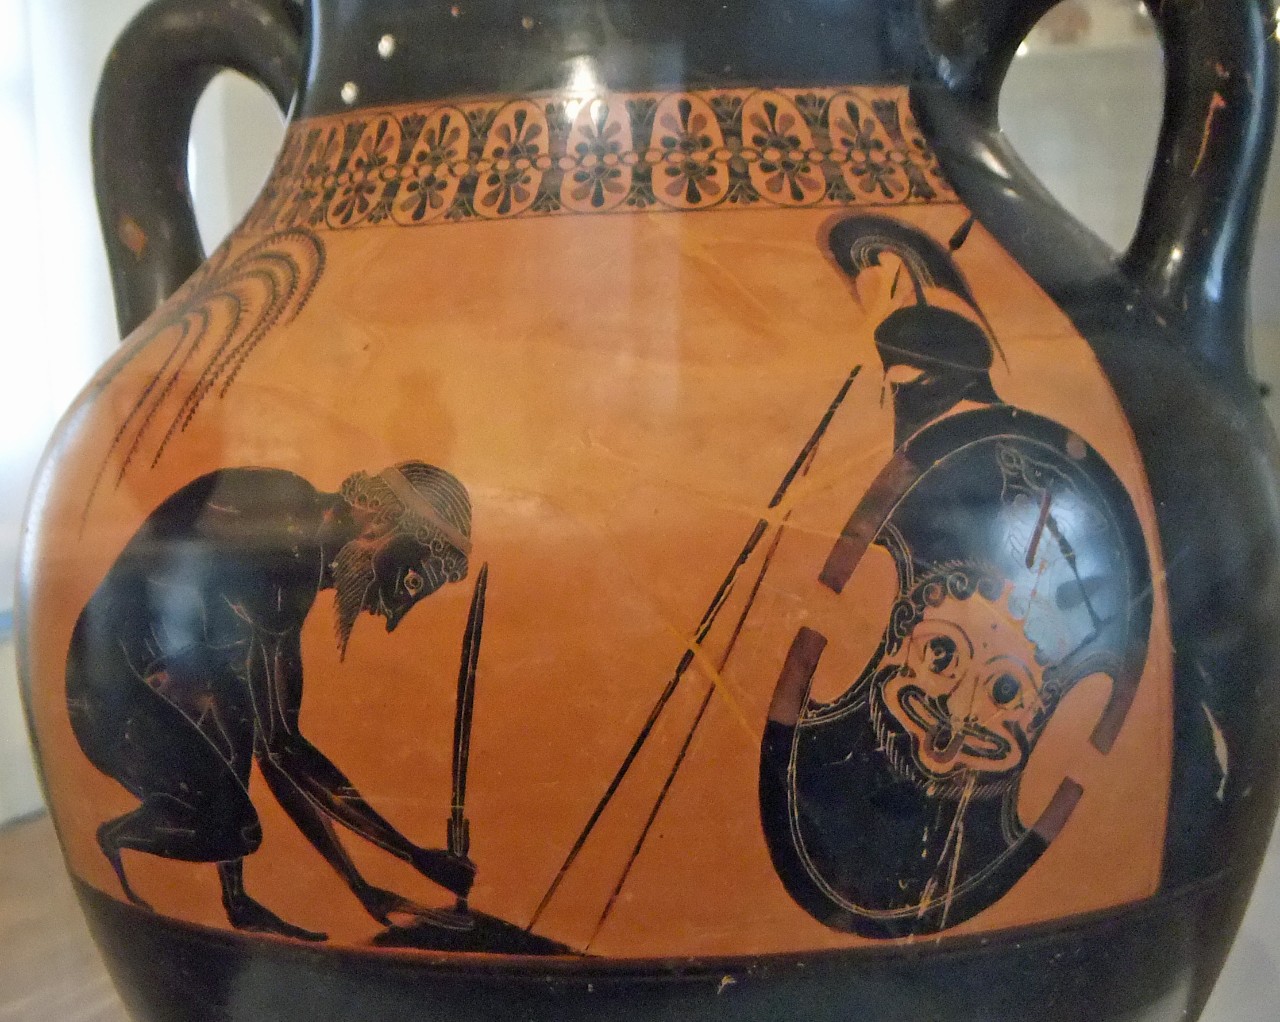 An ancient Greek vase by the artist Exekias depicts the suicide of Ajax after the Trojan War.